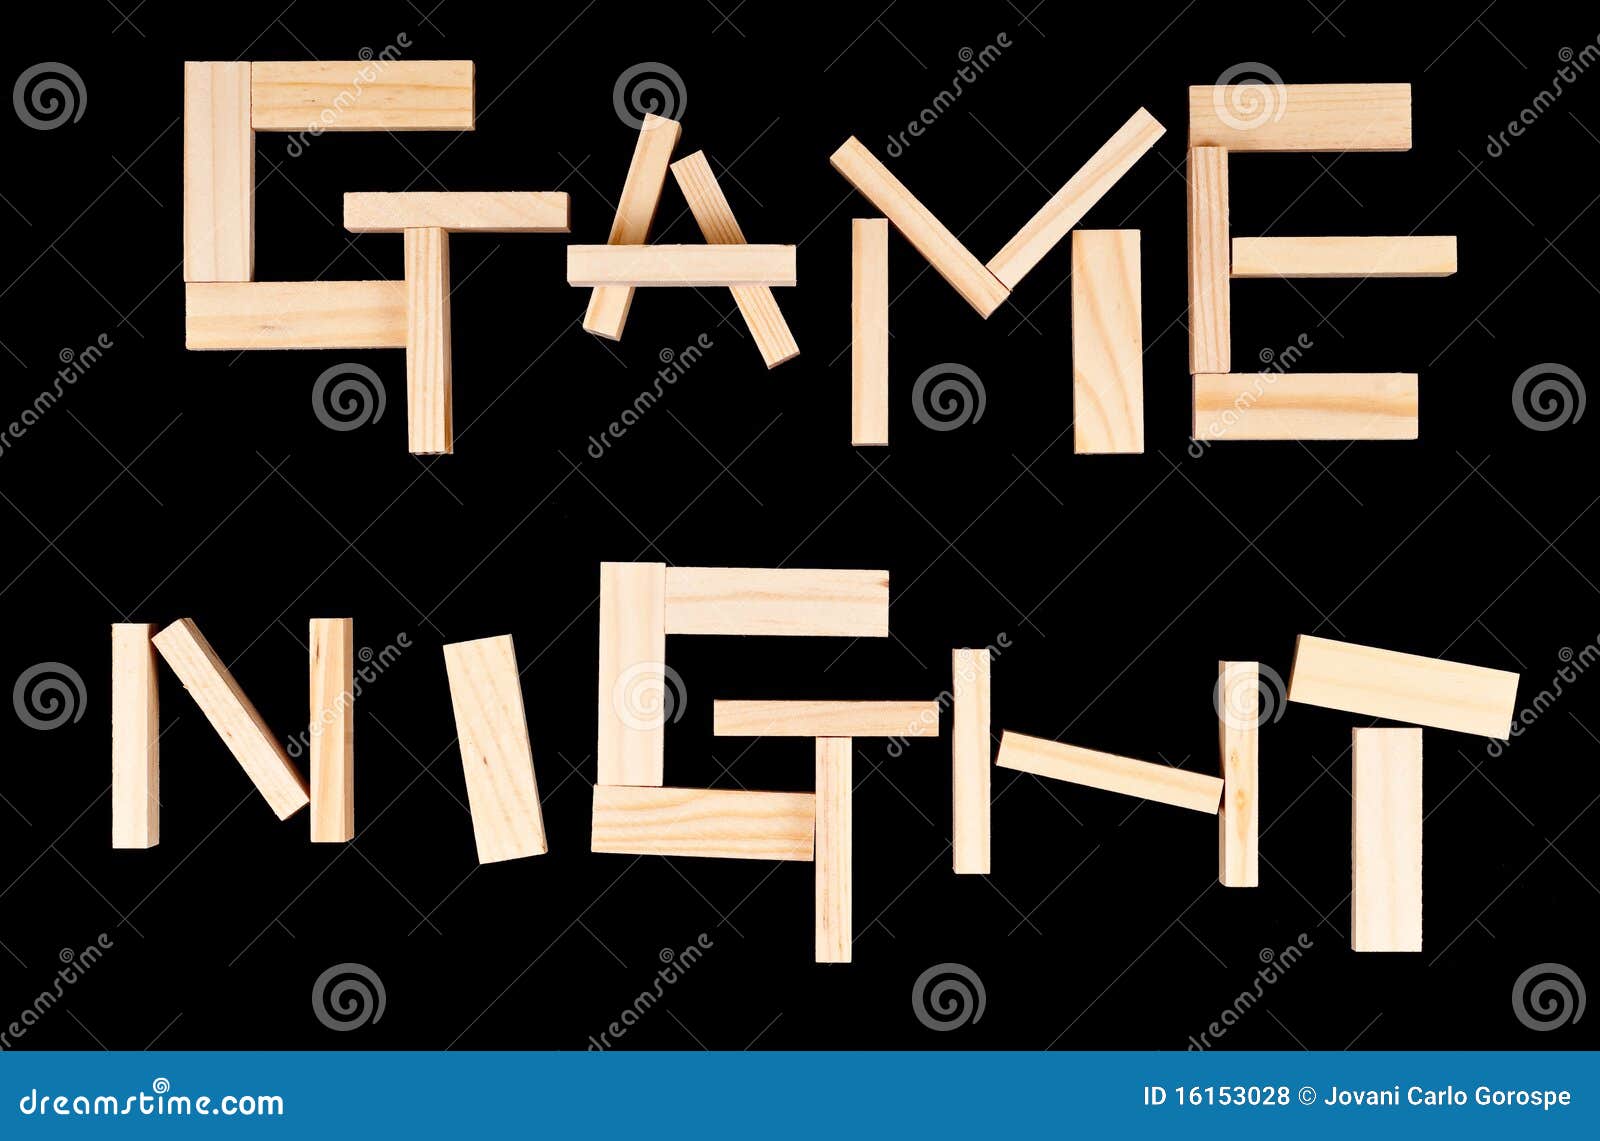 clip art for game night - photo #27